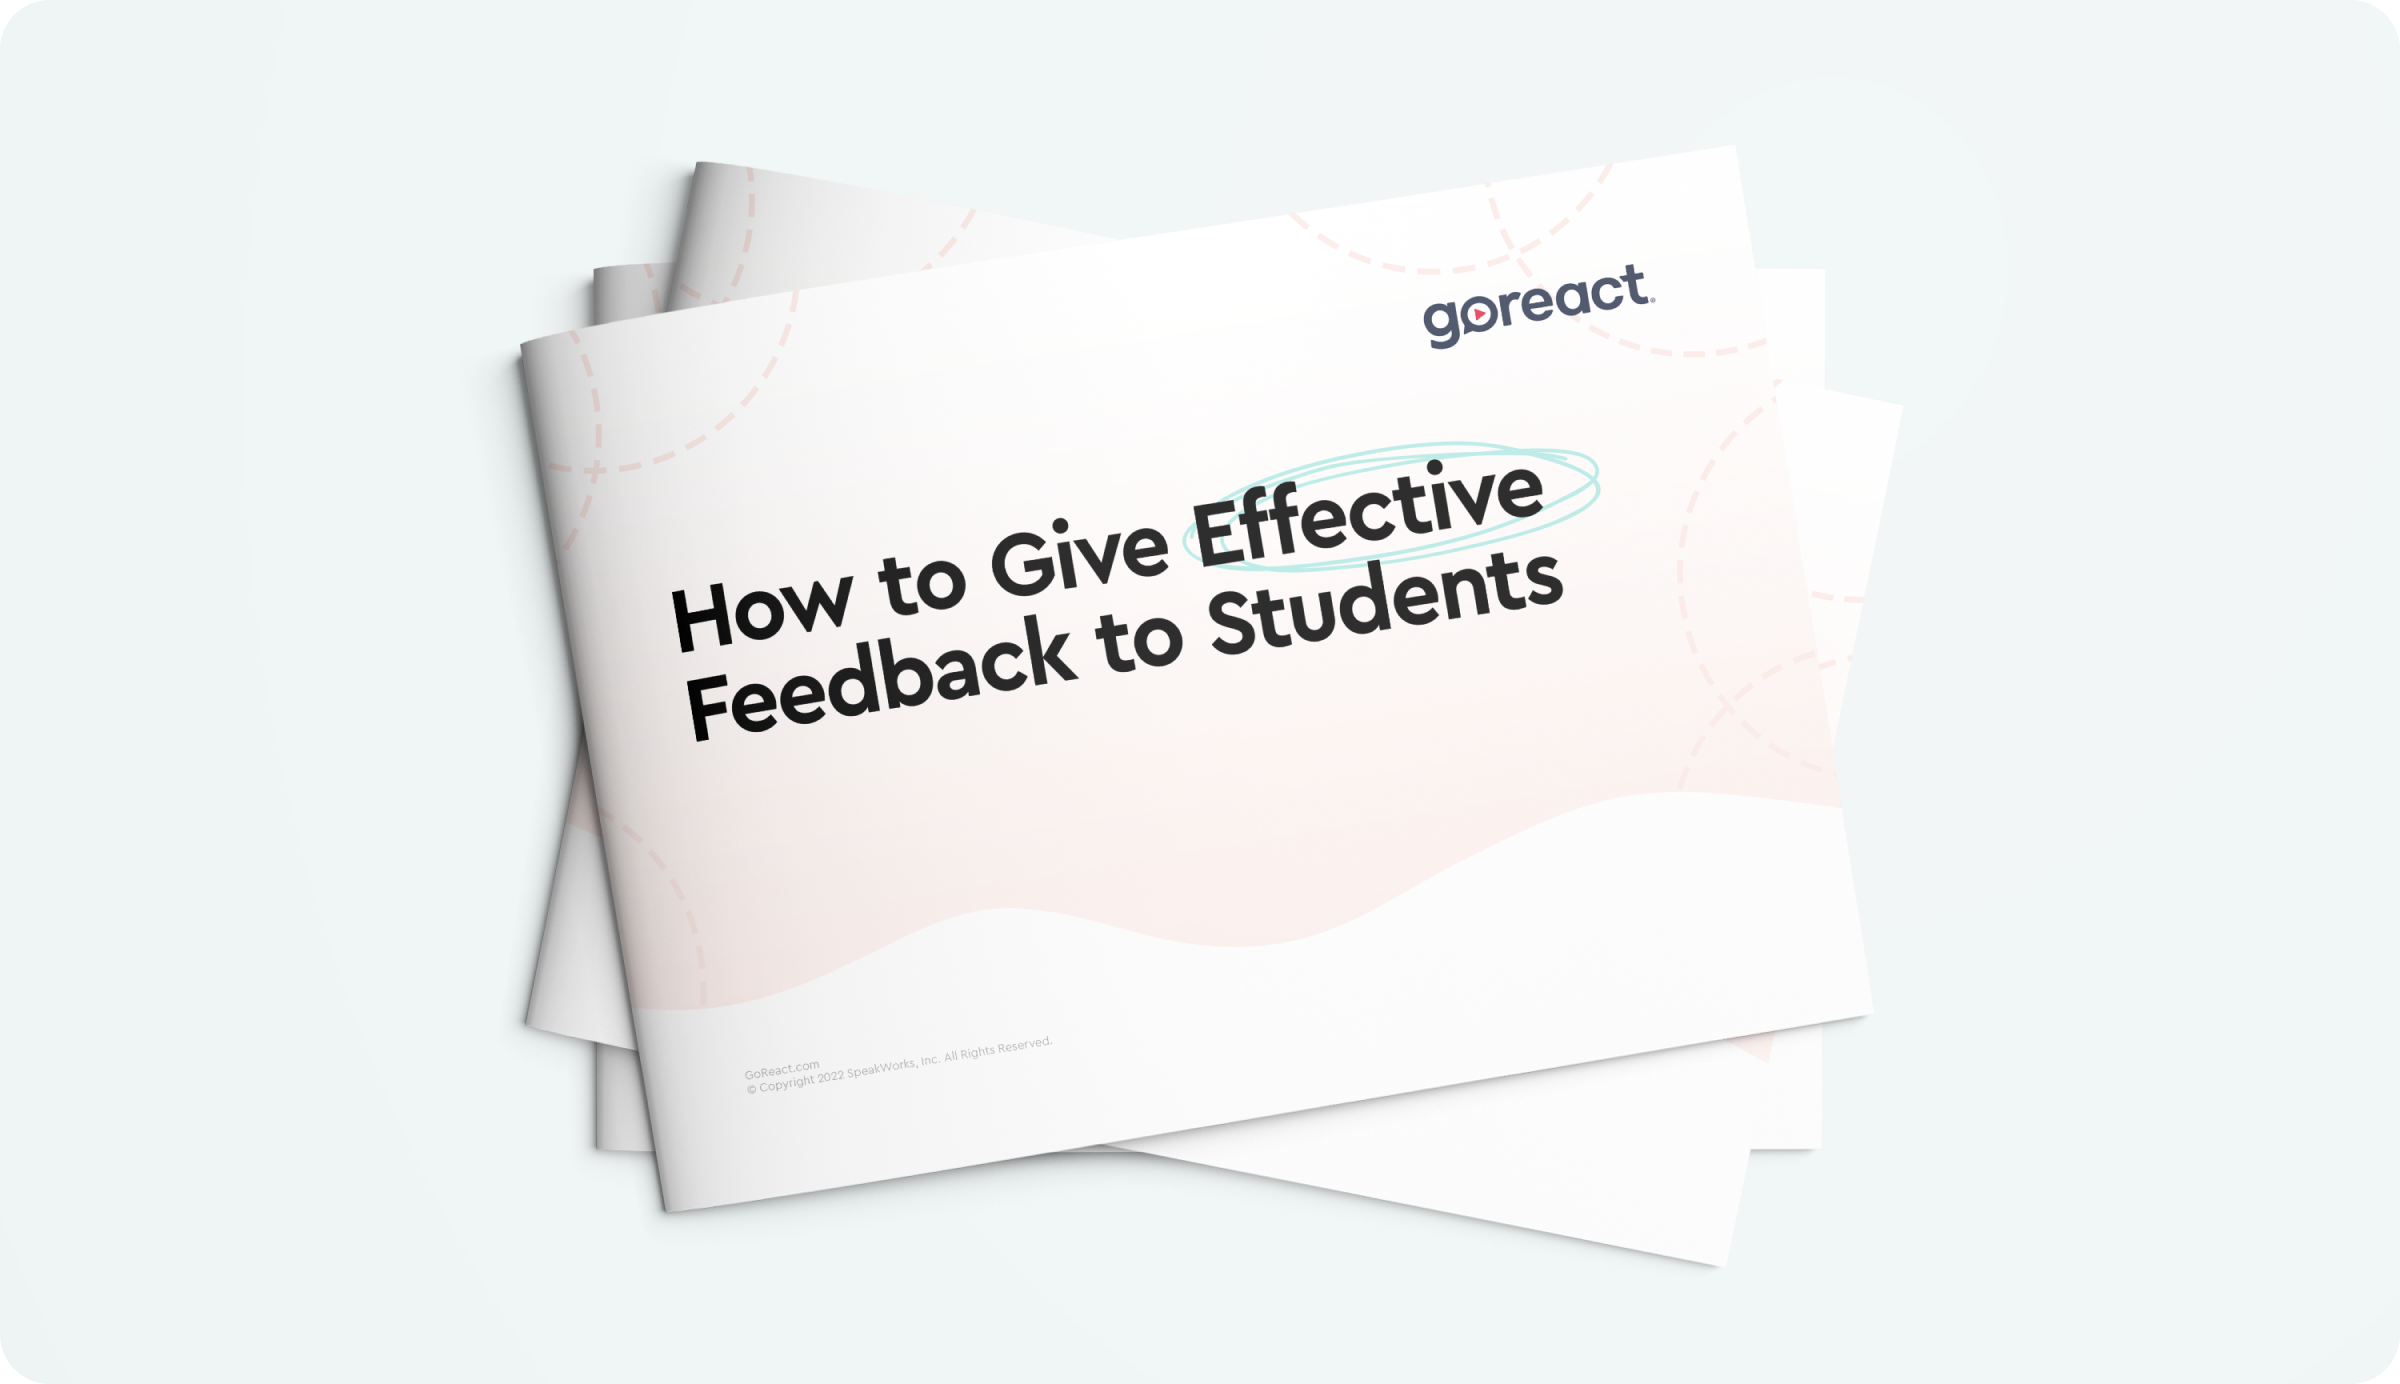 How to Give Effective Feedback to Students